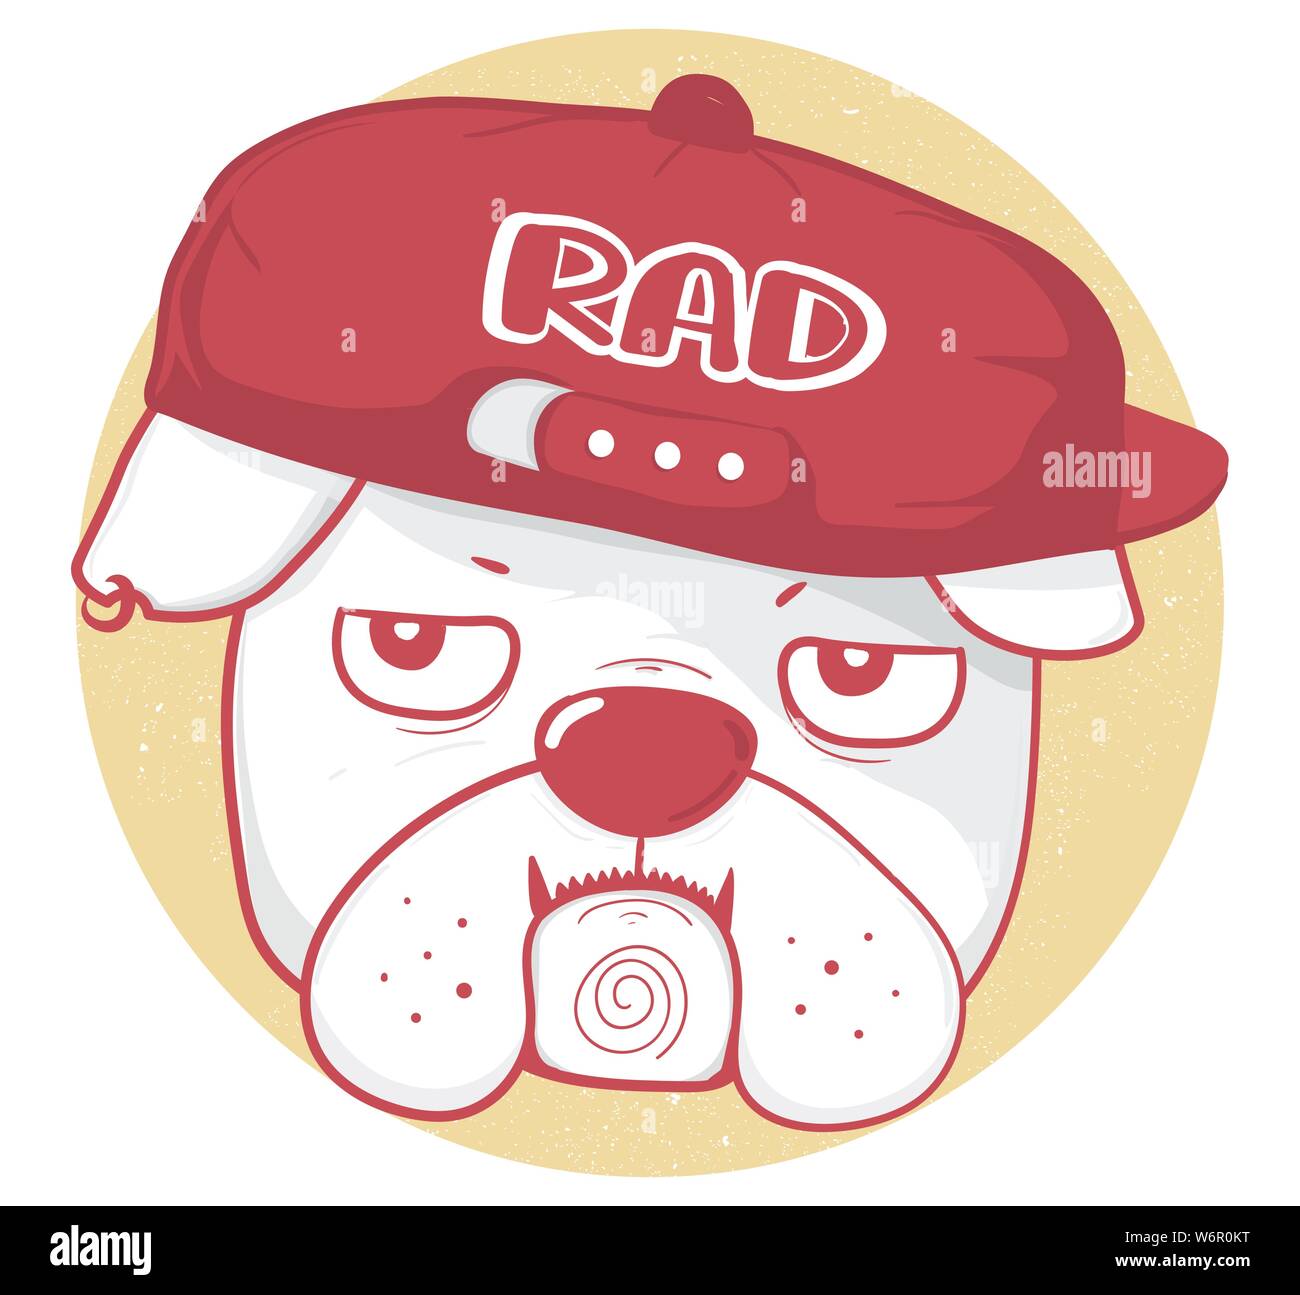 face of grumpy bulldog wear baseball cap with RAD text, drawing outline in red color vintage style, great idea for kid, child, tshirt design, apparel Stock Vector